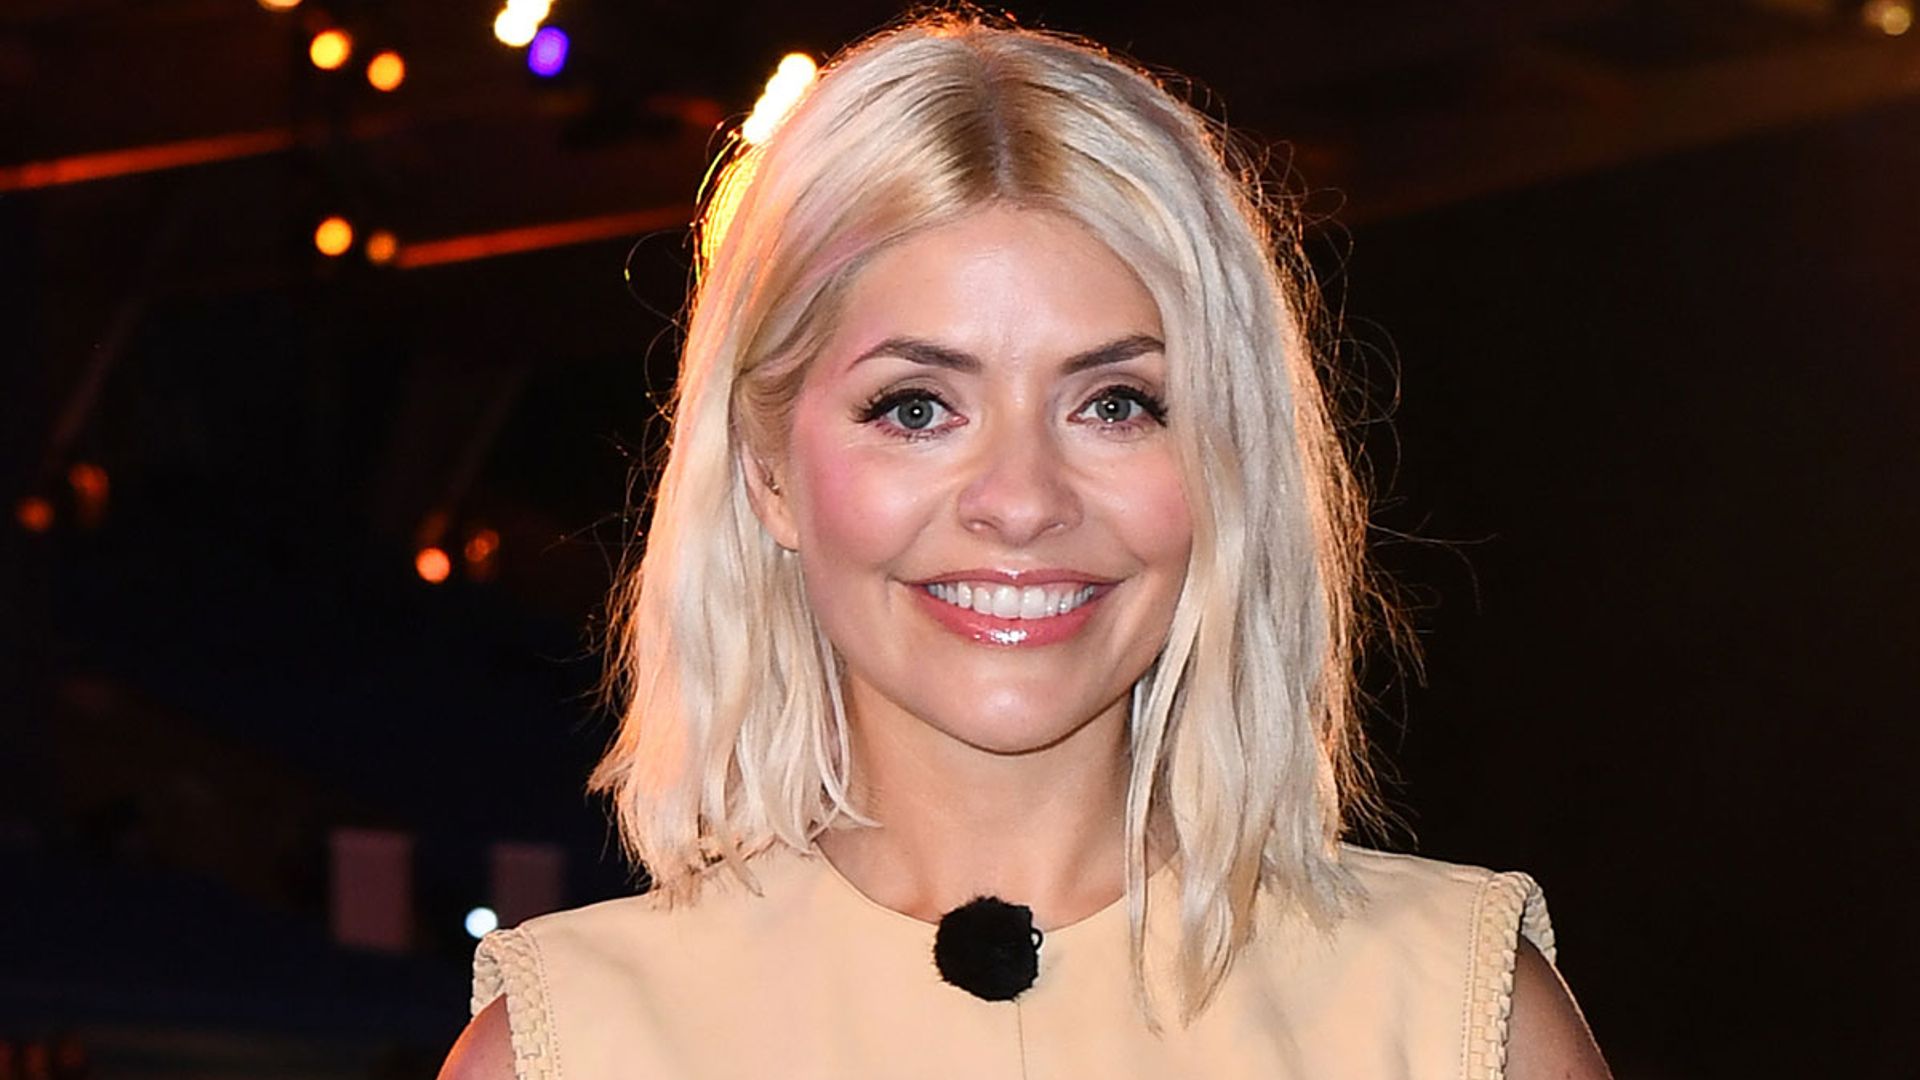 Holly Willoughbys Stunning Selfie Has Fans All Saying The Same Thing Hello 